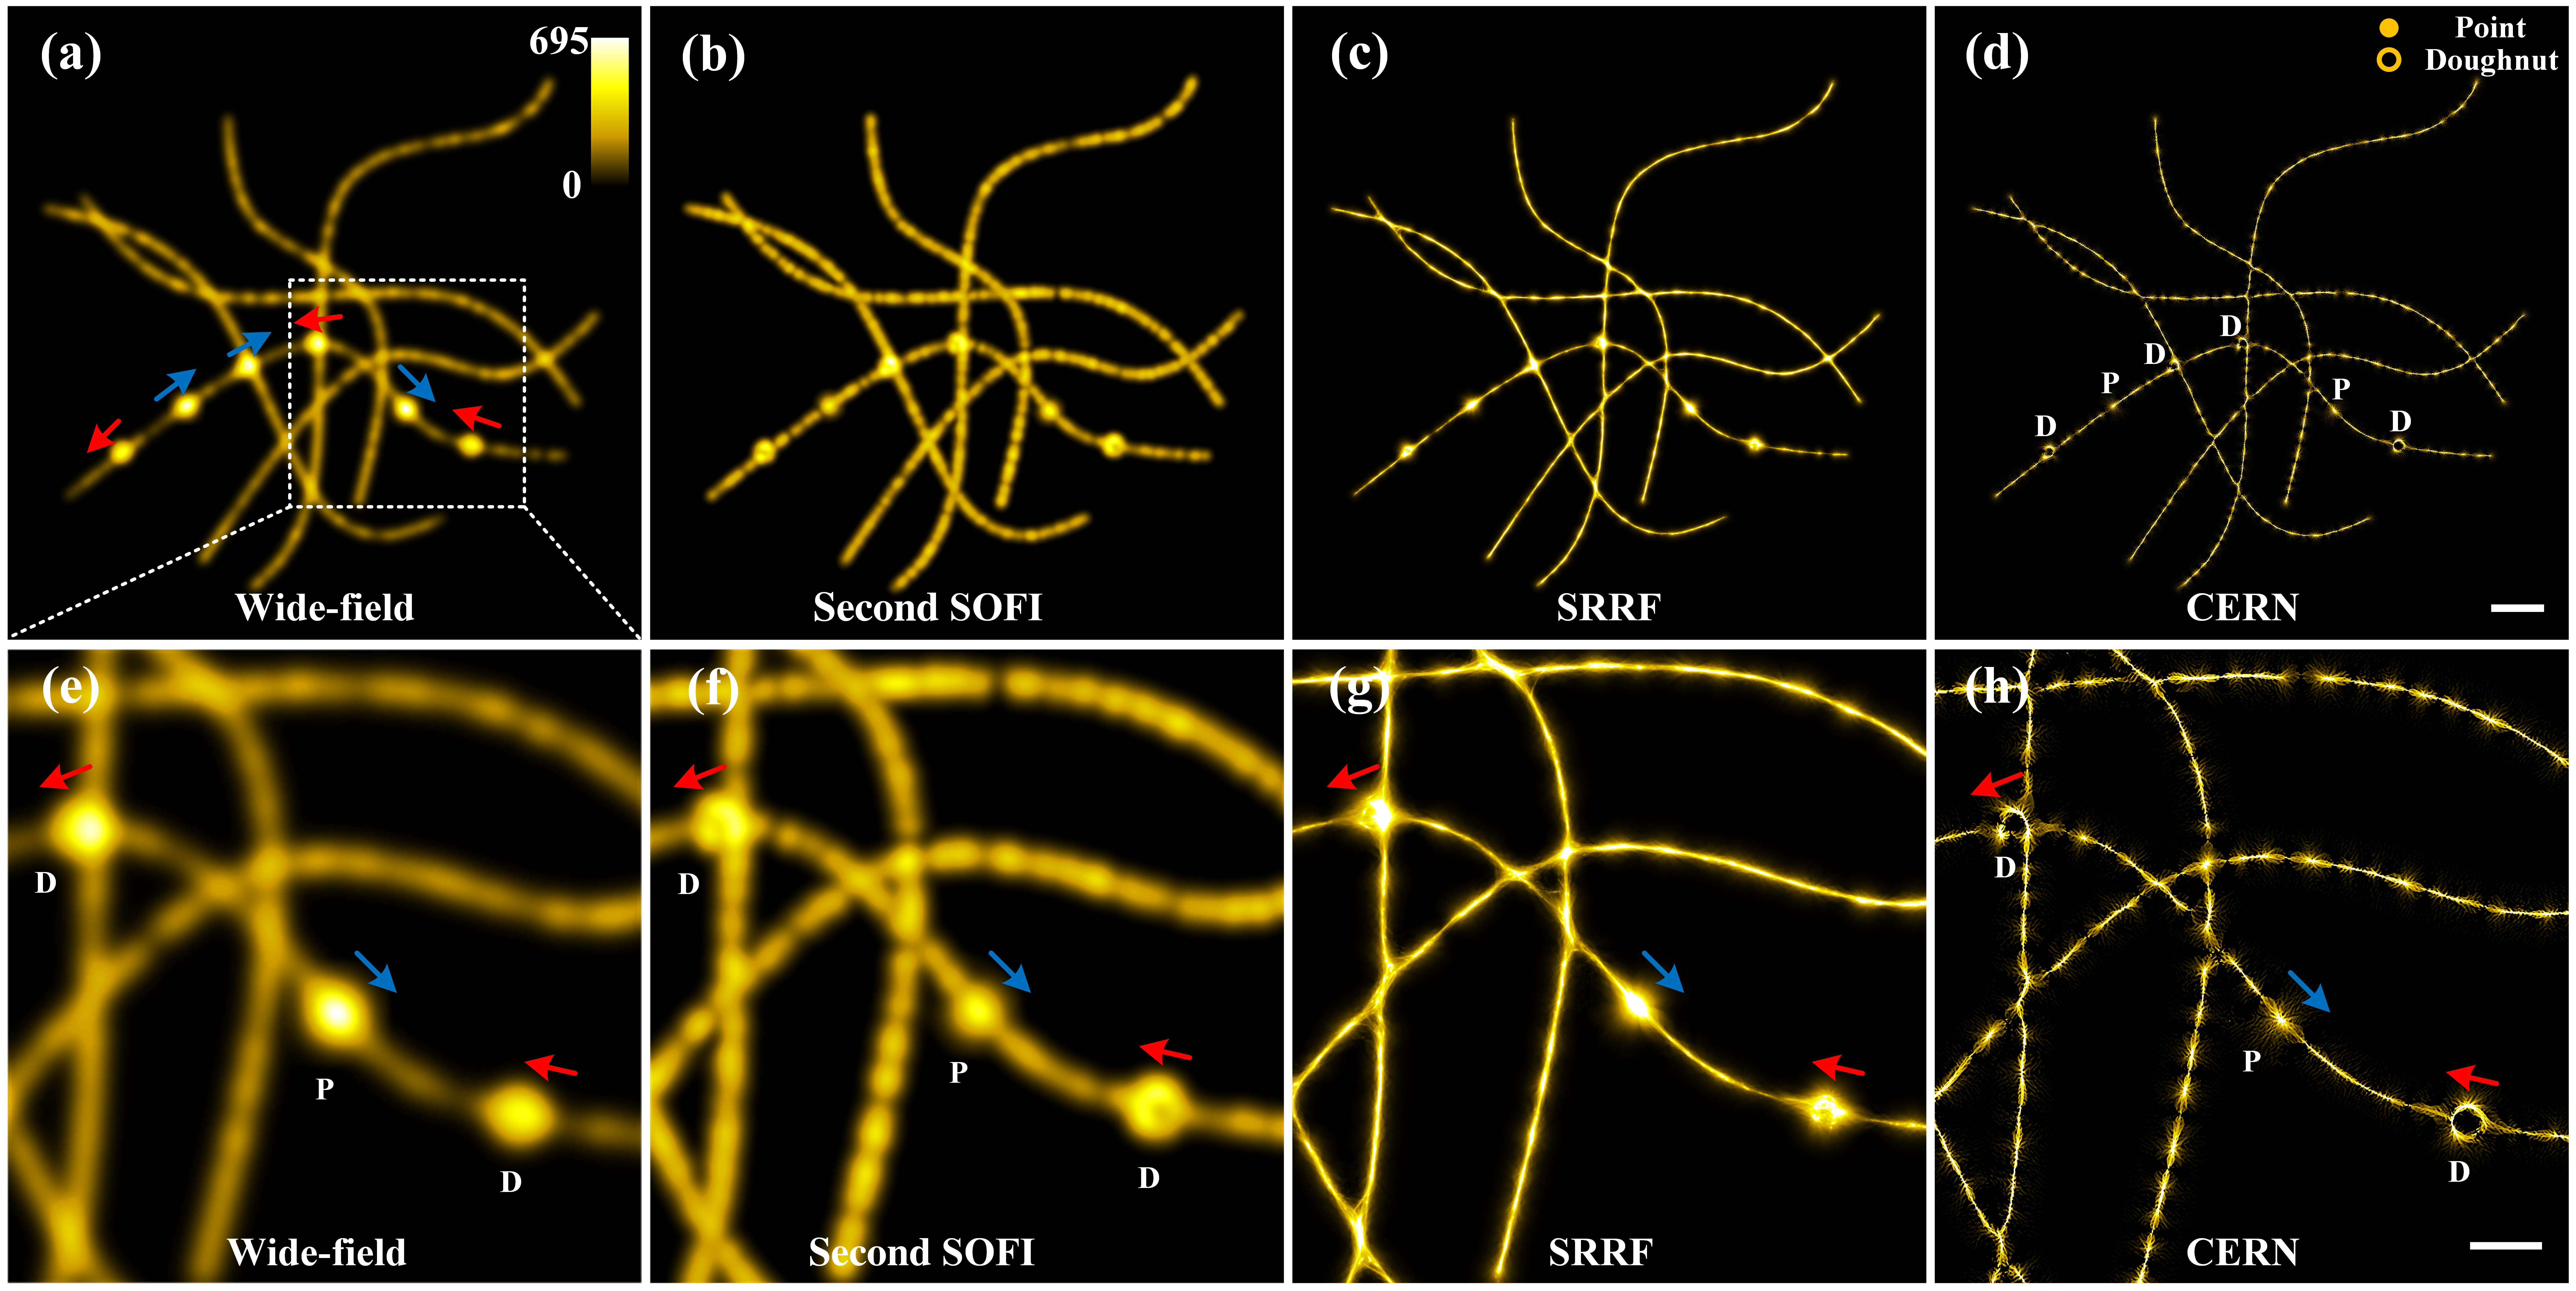 (a) Wide-field image of the simulated tubulin-like network with dynamic doughnut-shaped and point-like nanoscale cargoes moving along network lines; (b), (c) second-order SOFI and SRRF (TRA) images of the simulated dynamic structure; (d) CERN image of the simulated dynamic structure, precisely discerning the doughnut-shaped cargoes (marked by “D”) from the point-like cargoes (marked by “P”); (e)–(h) magnified images indicated by the white dotted regions from (a) to (d). For the cargoes marked by “P,” we generated the cargo images by convolving point-like structures (30 nm radii) with a Gaussian PSF. For the cargoes marked by “D,” we generated the cargo images by convolving ring-like structures (90 nm radii) with a smaller Gaussian PSF. Different PSFs indicated the labeling of two different types of fluorophores with distinct wavelengths for imaging different targets. The blue and red arrows represent the different moving directions of the cargoes along the network lines. Scale bars, 1 μm in (a)–(d); 300 nm in (e)–(h).